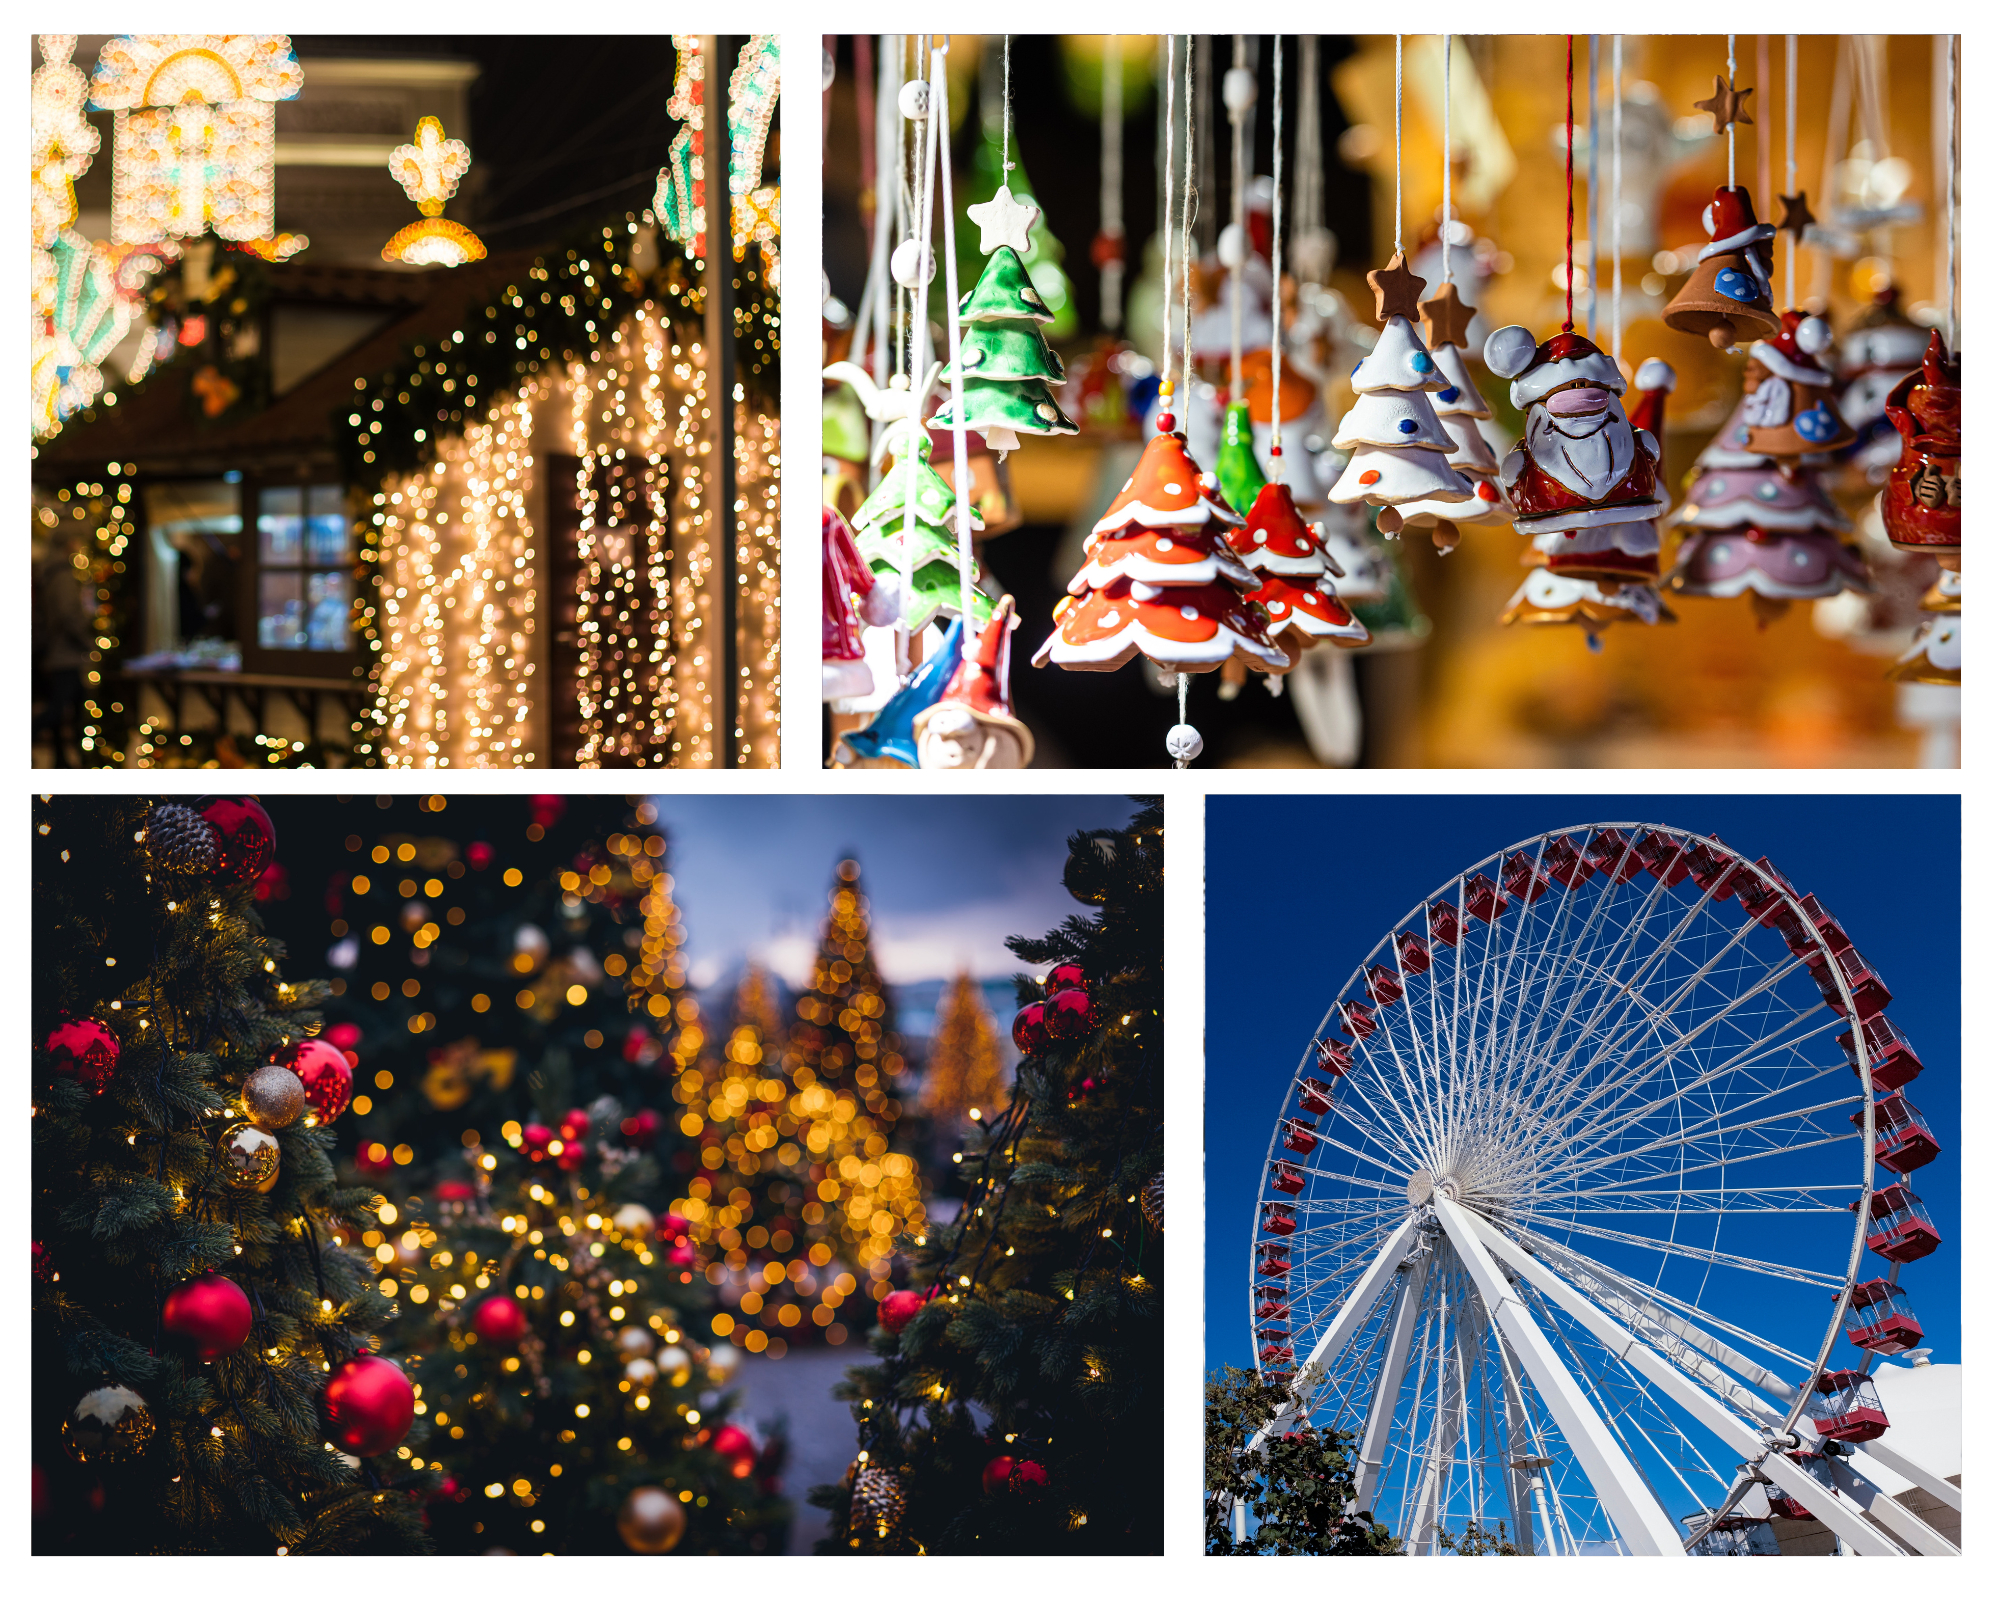 Enjoy these festive activities in Chicago this month!